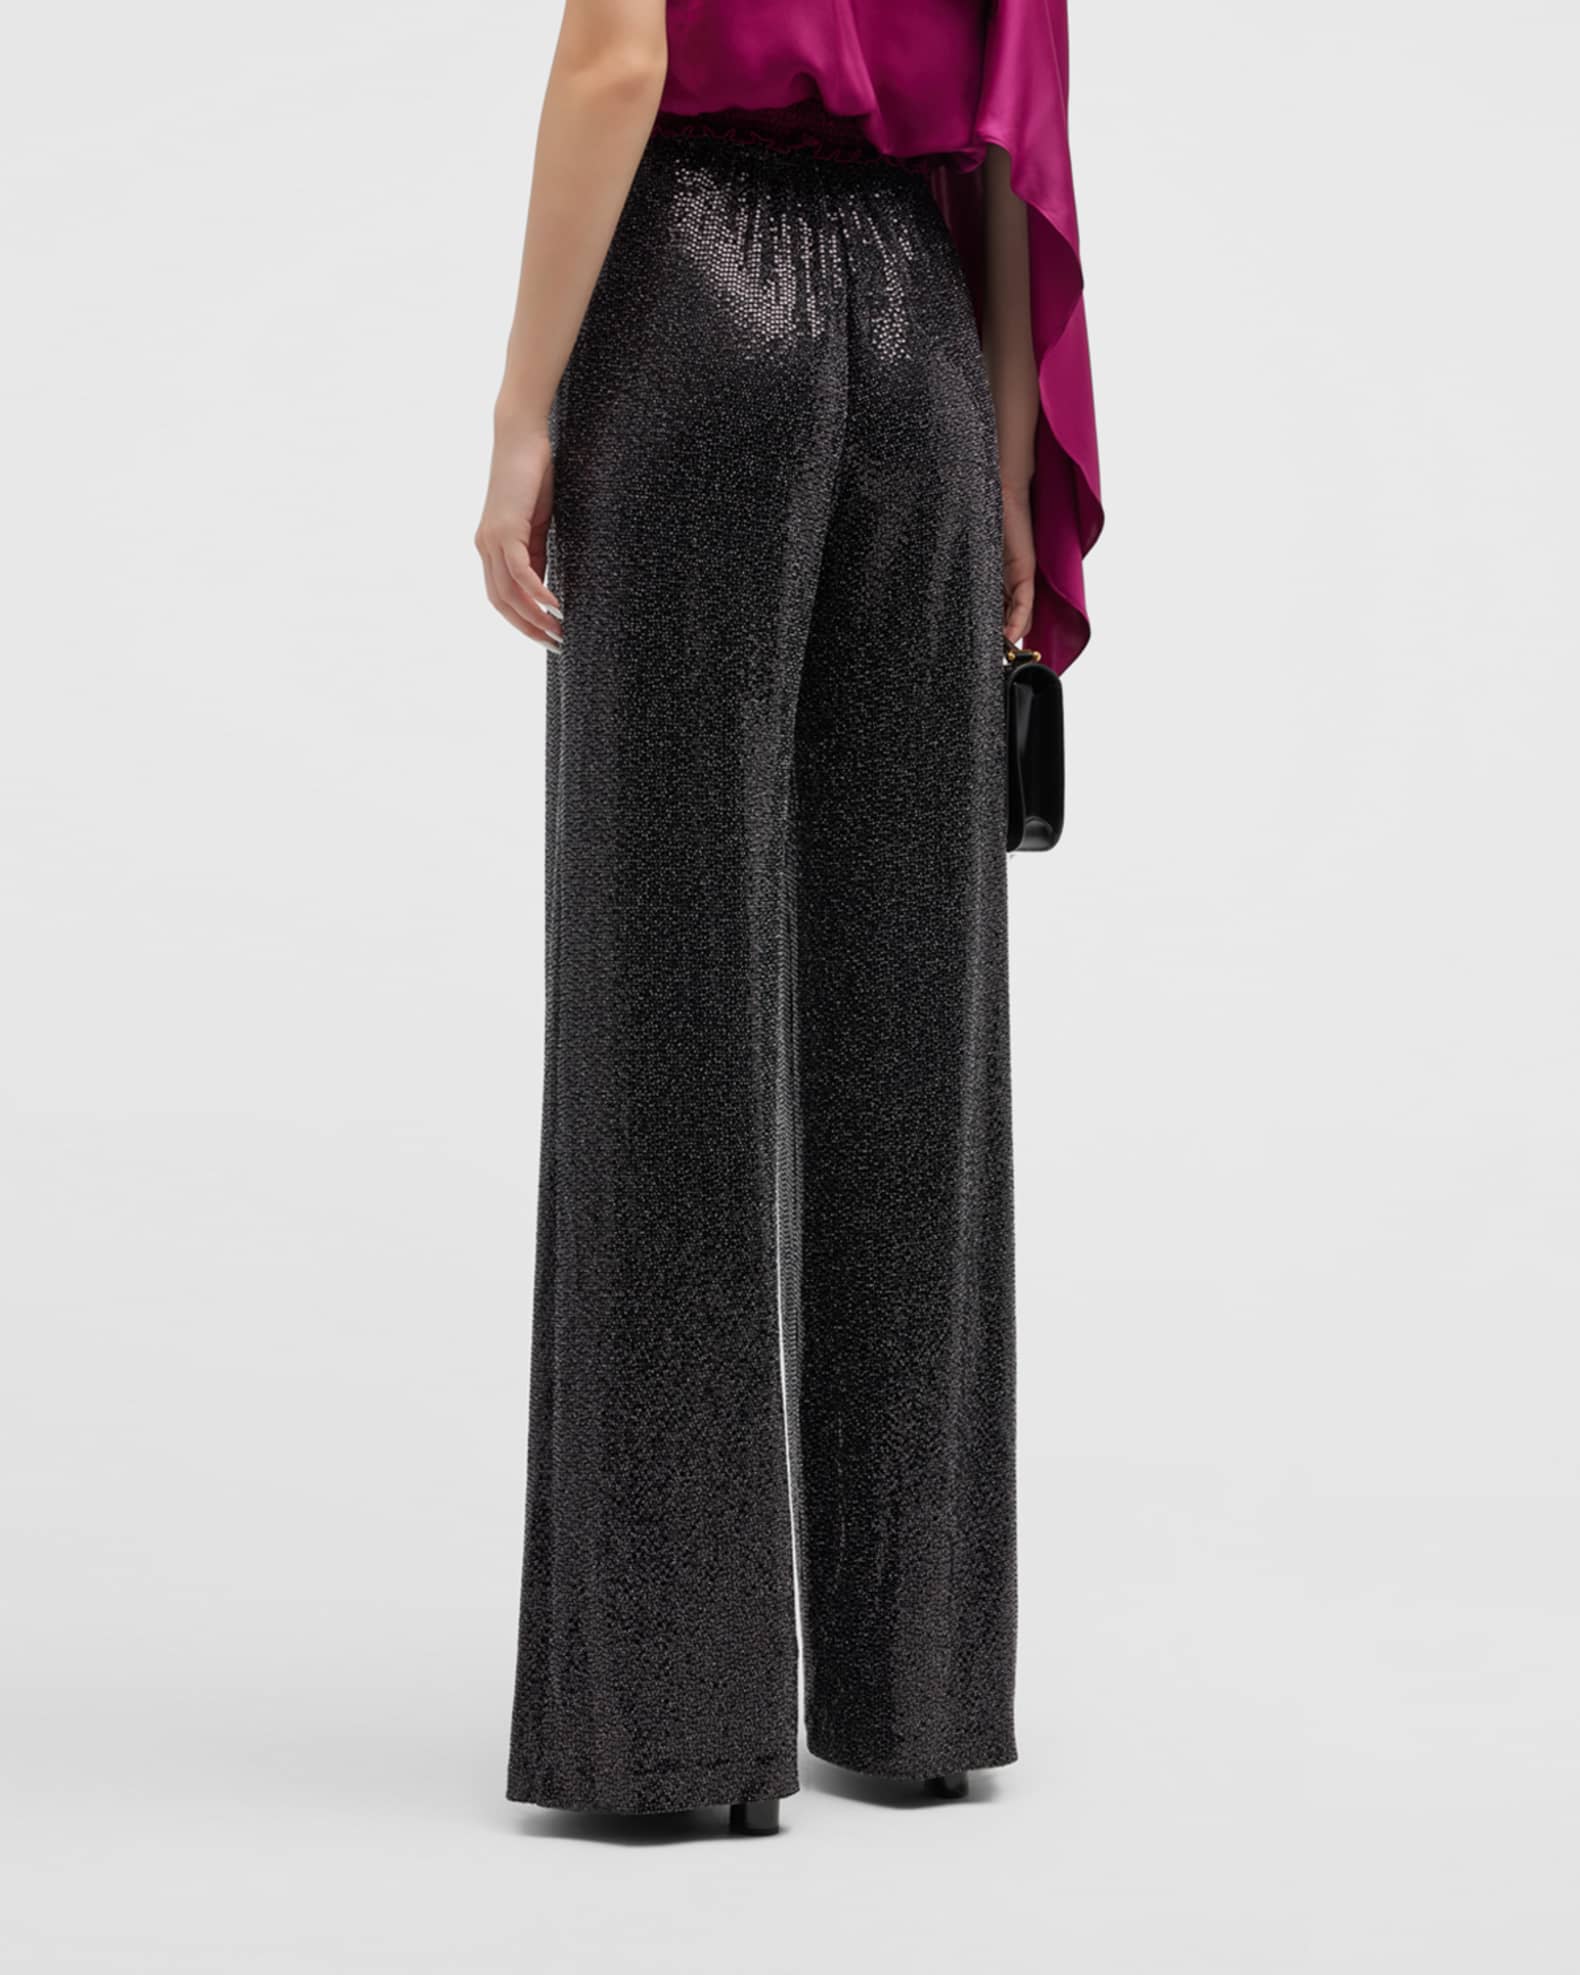 Ramy Brook Avalon Pant Black SequinA – The Blue Collection